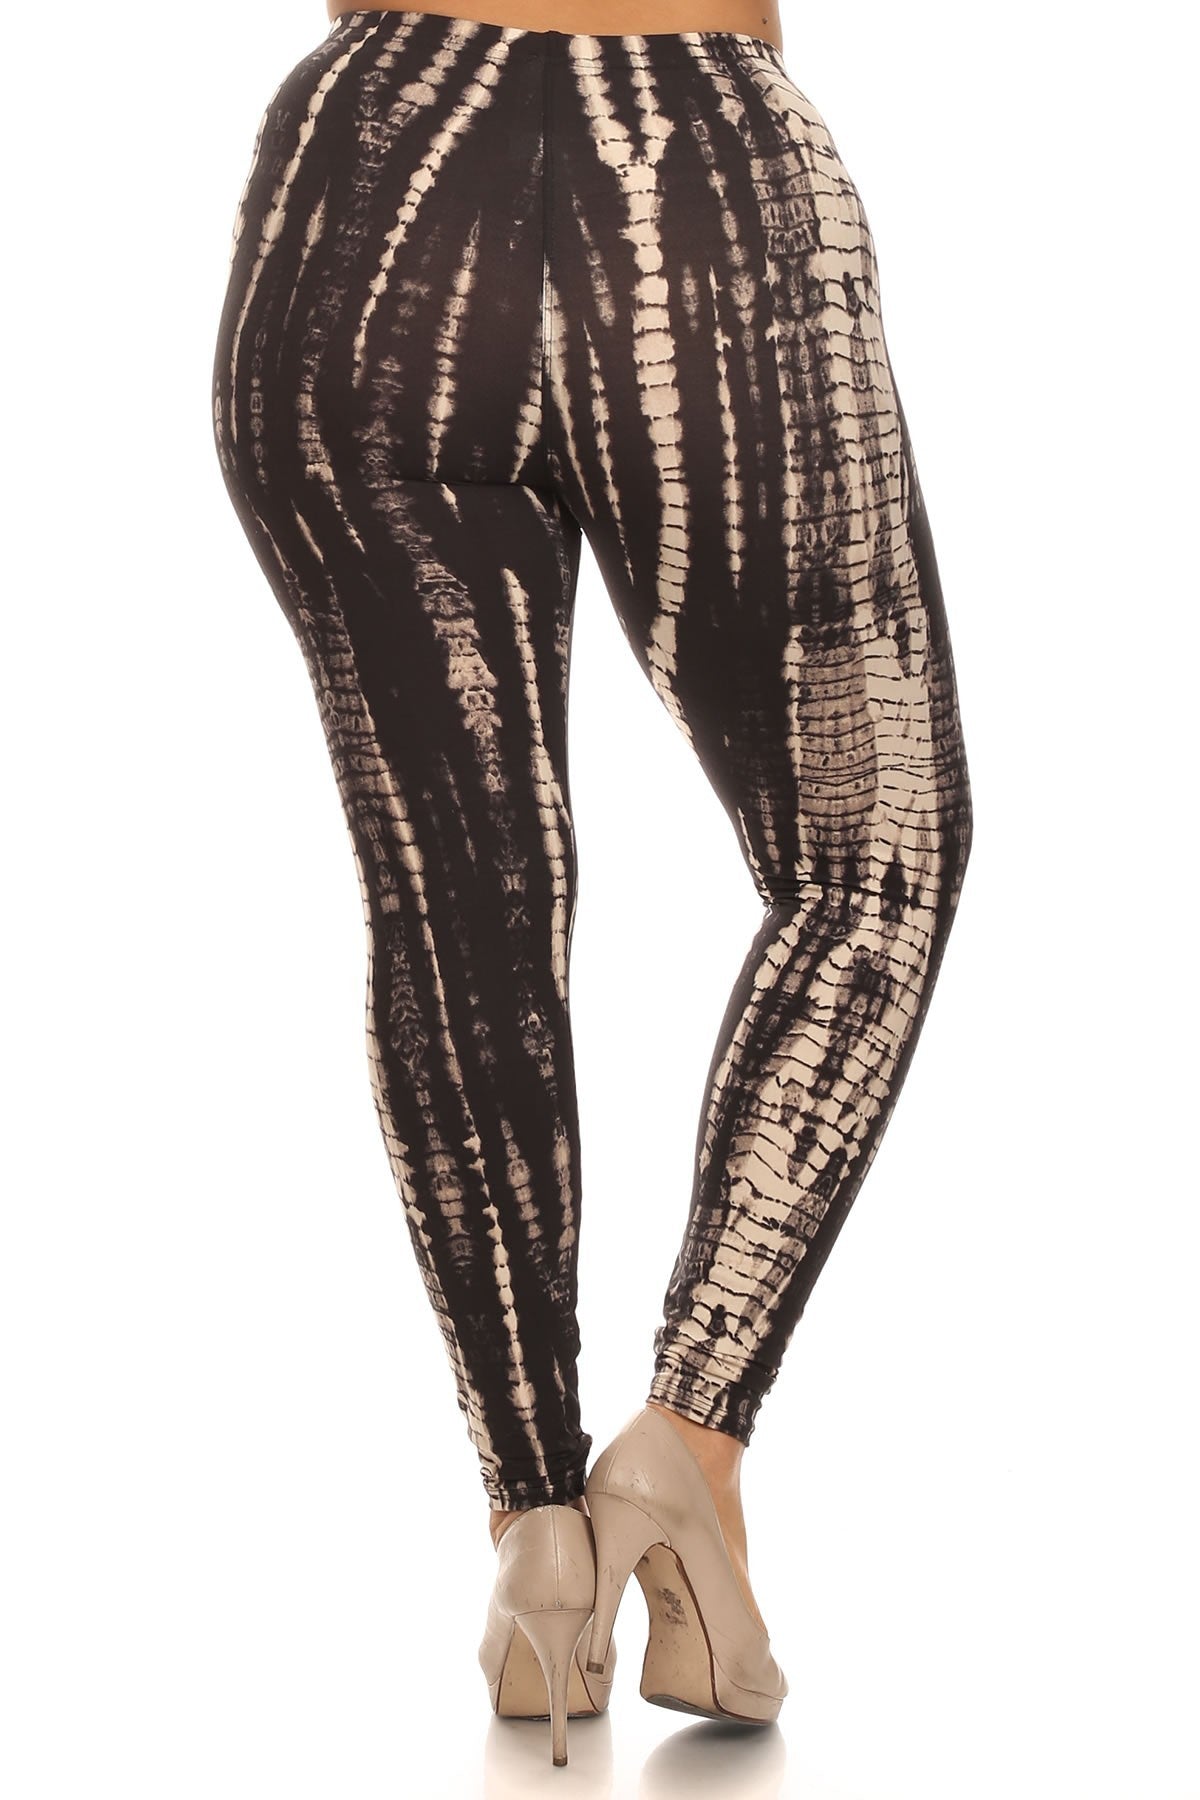 Plus Black And Tan Tie Dye Print Full Length Fitted Leggings With High Waist.